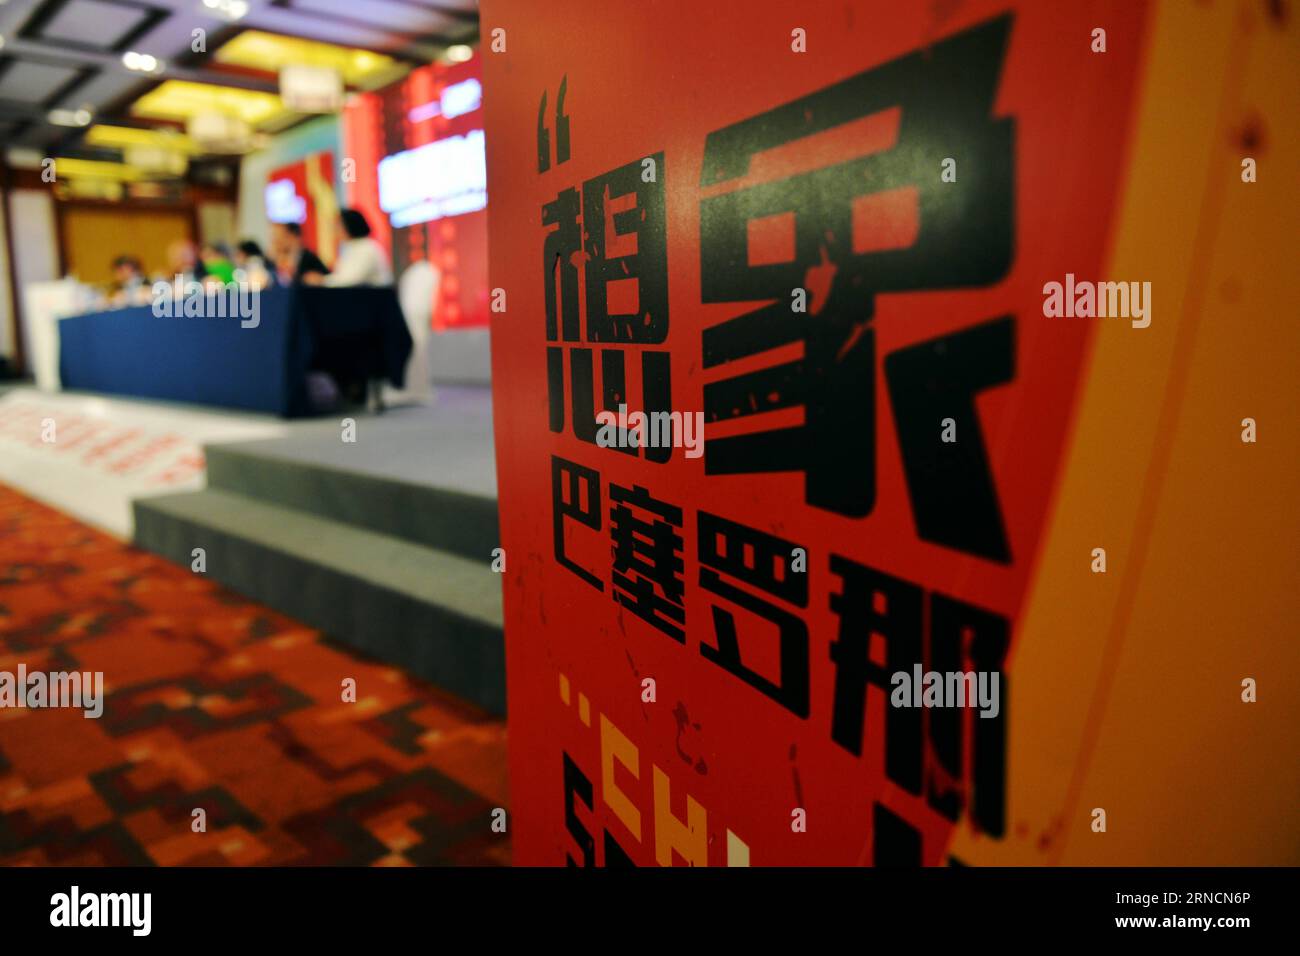 (160417) -- BEIJING, April 17, 2016 -- A press conference of the first Sino-Spanish film culture exchange project is held in Beijing, capital of China, April 17, 2016. According to the project, ten Chinese films will be shown during the first Sino-Spanish film week in majors cities of Spain s Andalucia region in November of 2016. Moreover, the Barcelona government will invite Chinese young directors for a one-month shooting project with Spanish directors. )(wjq) CHINA-BEIJING-SINO-SPANISH FILM CULTURE EXCHANGE PROJECT-PRESS CONFERENCE (CN) ChenxBin PUBLICATIONxNOTxINxCHN   160417 Beijing April Stock Photo